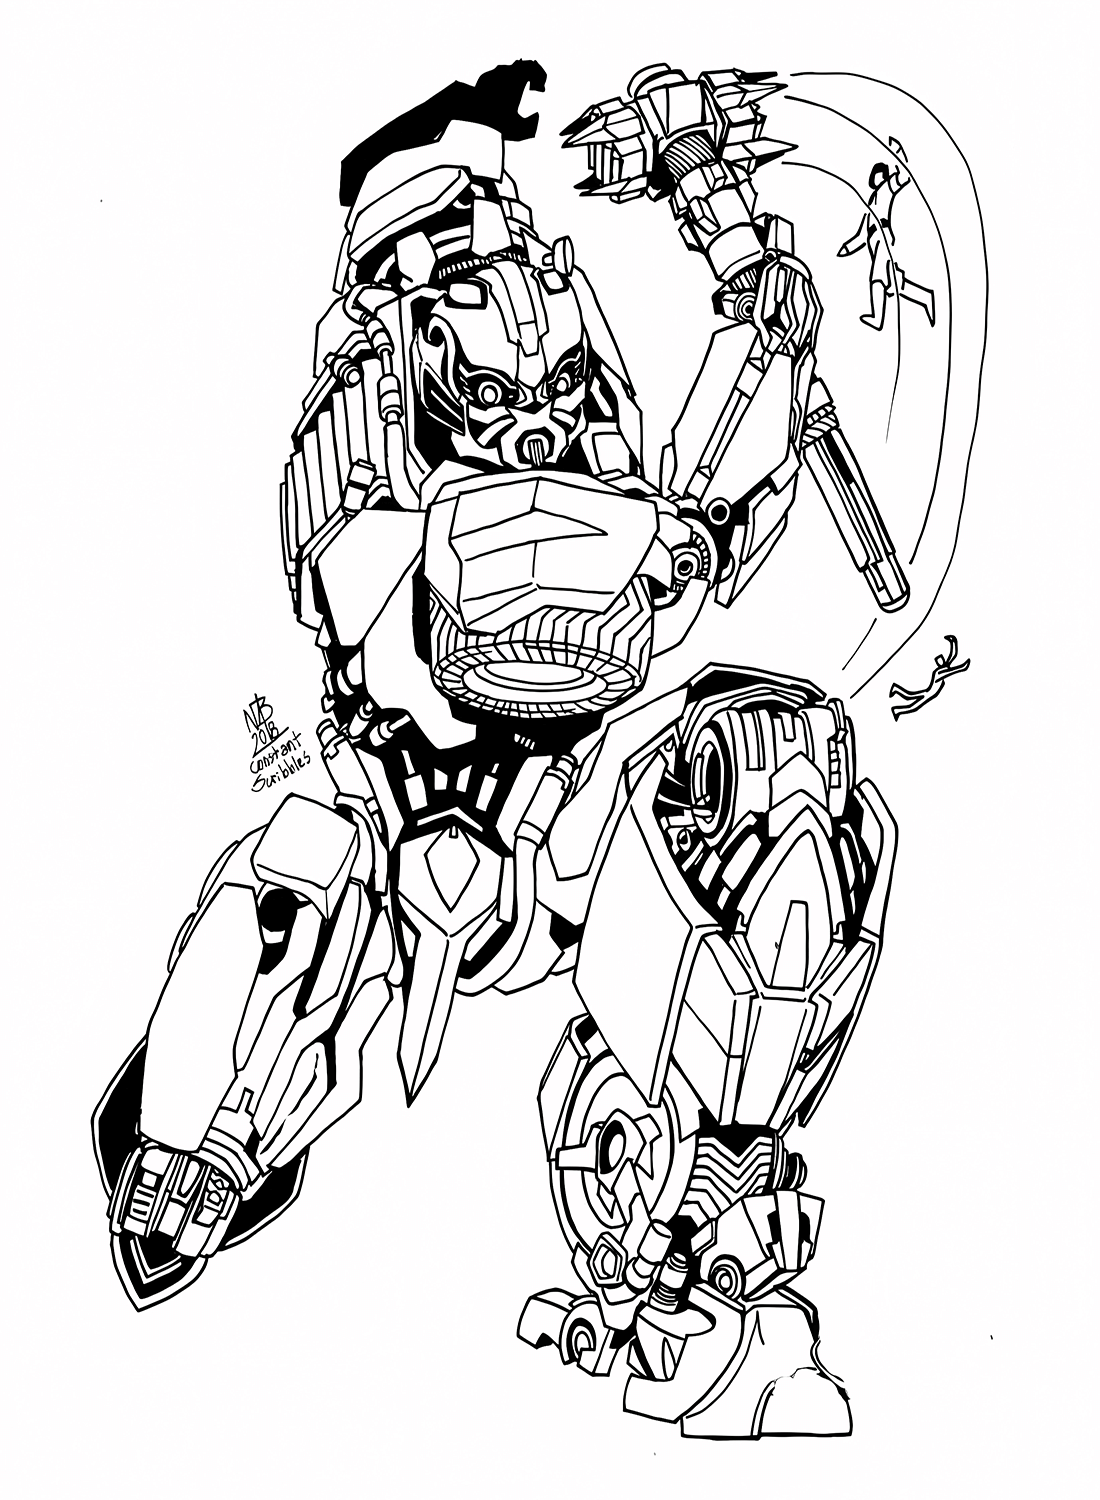 Bumblebee Action Printable Coloring Page